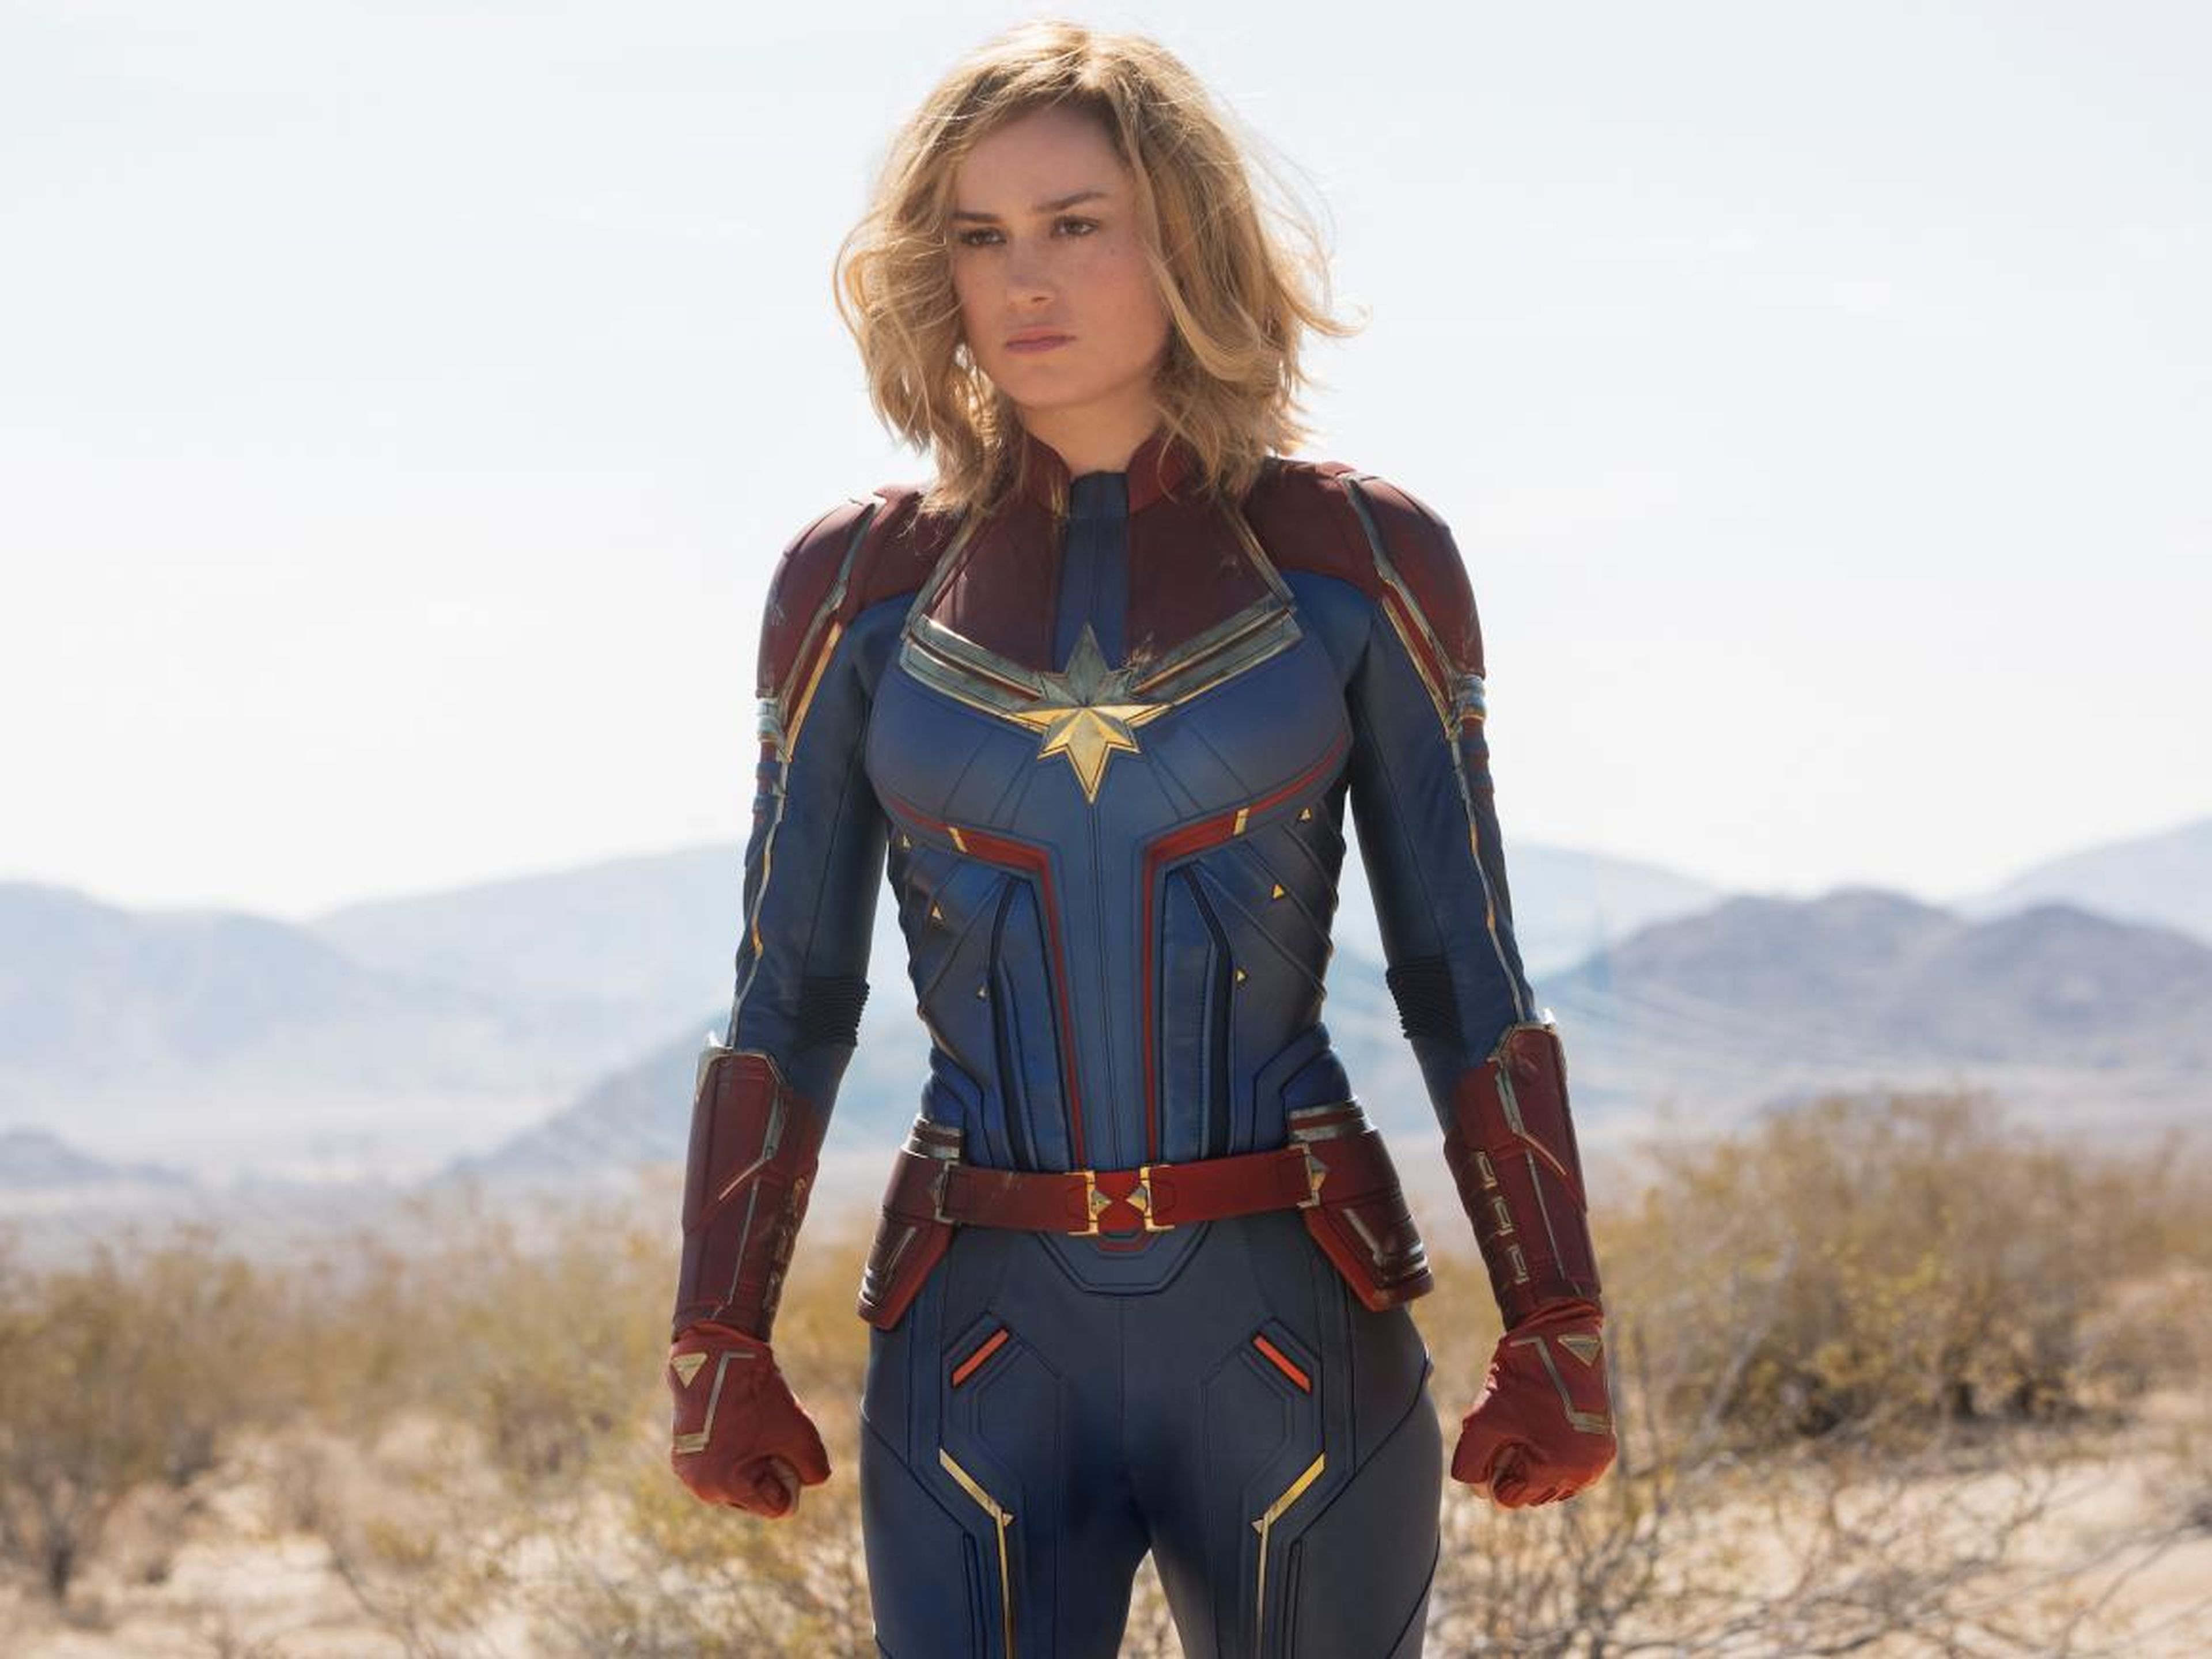 Captain Marvel just joined the Marvel Cinematic Universe. She can't be killed off this soon, right?